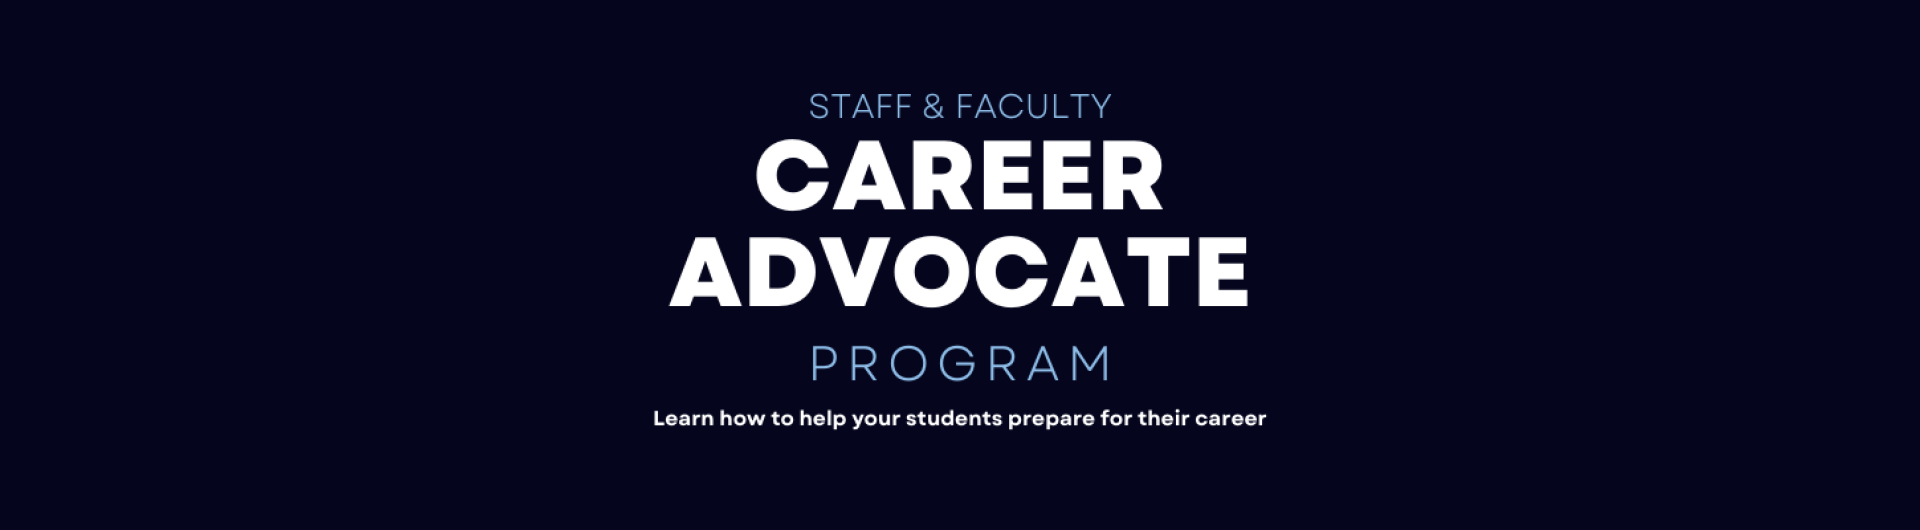 Staff and Faculty Career Advocate Informational Program Learn how to help your students prepare for their career 